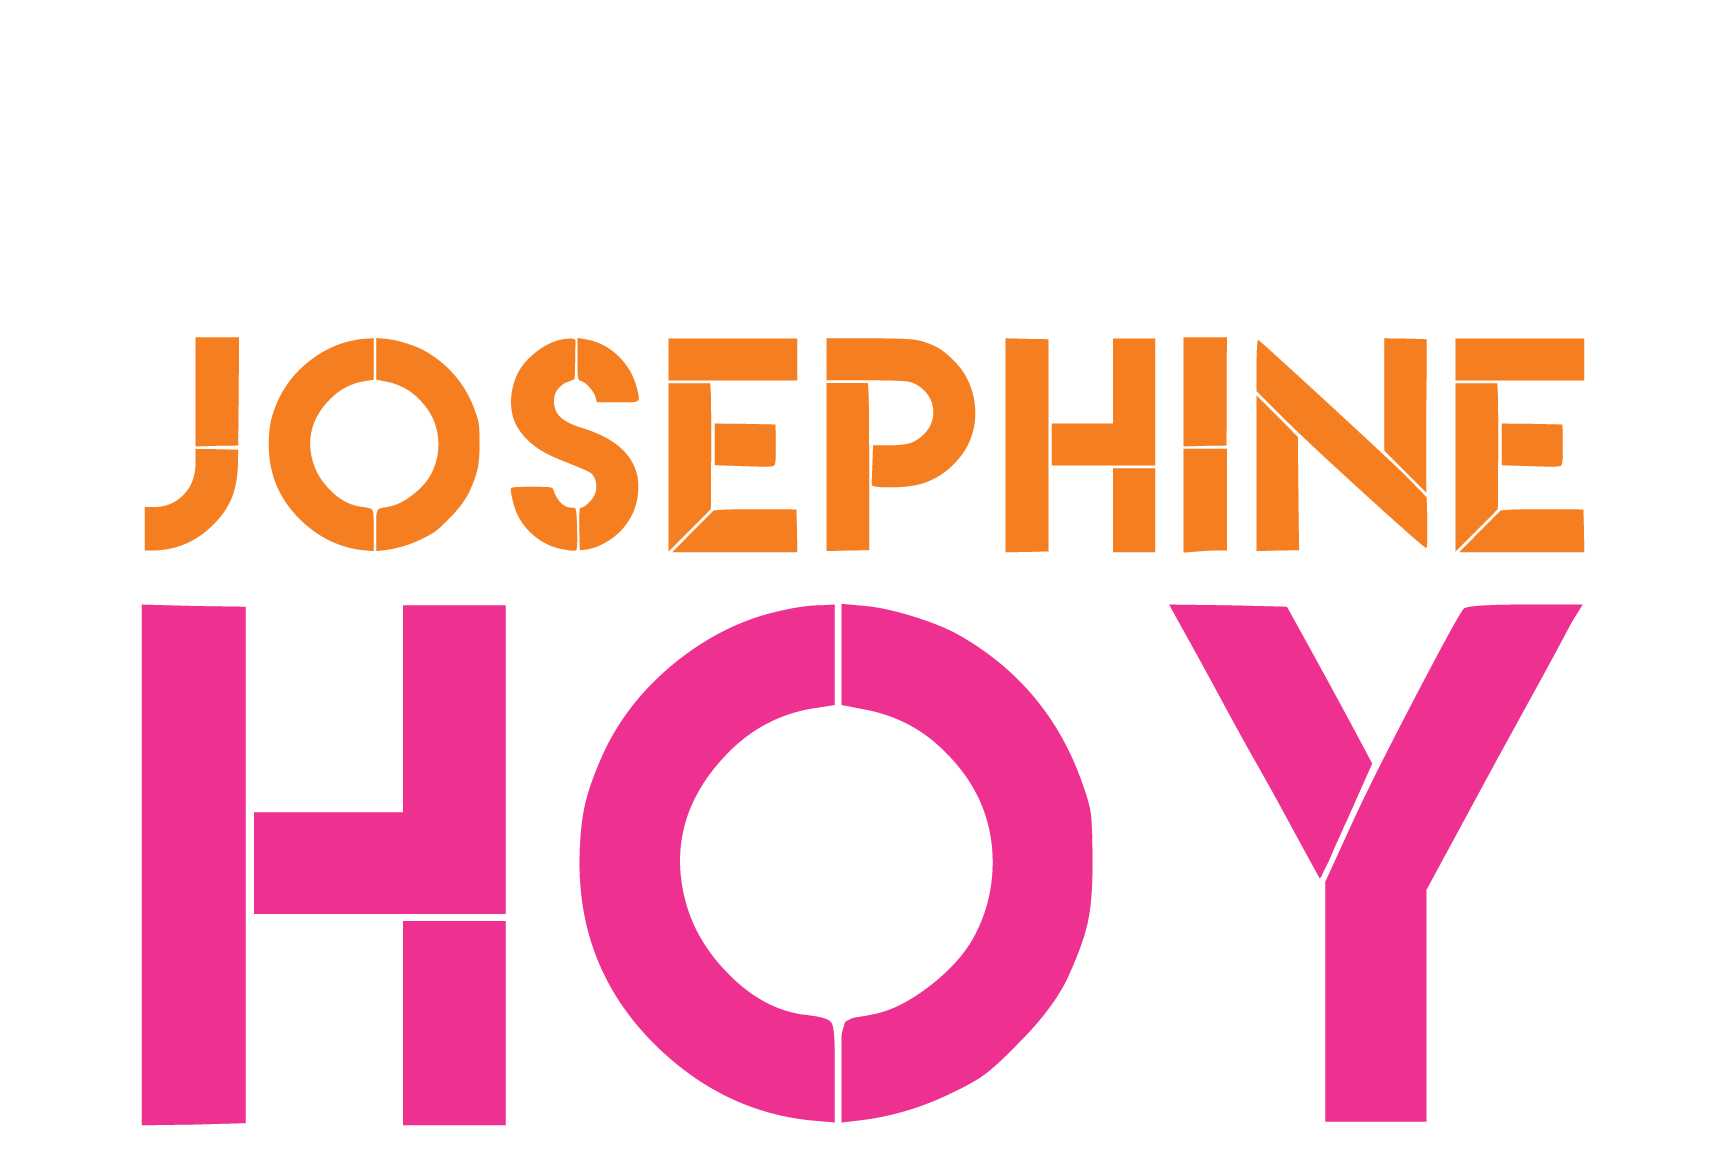 Josephine Hoy in block letters, orange and hot pink